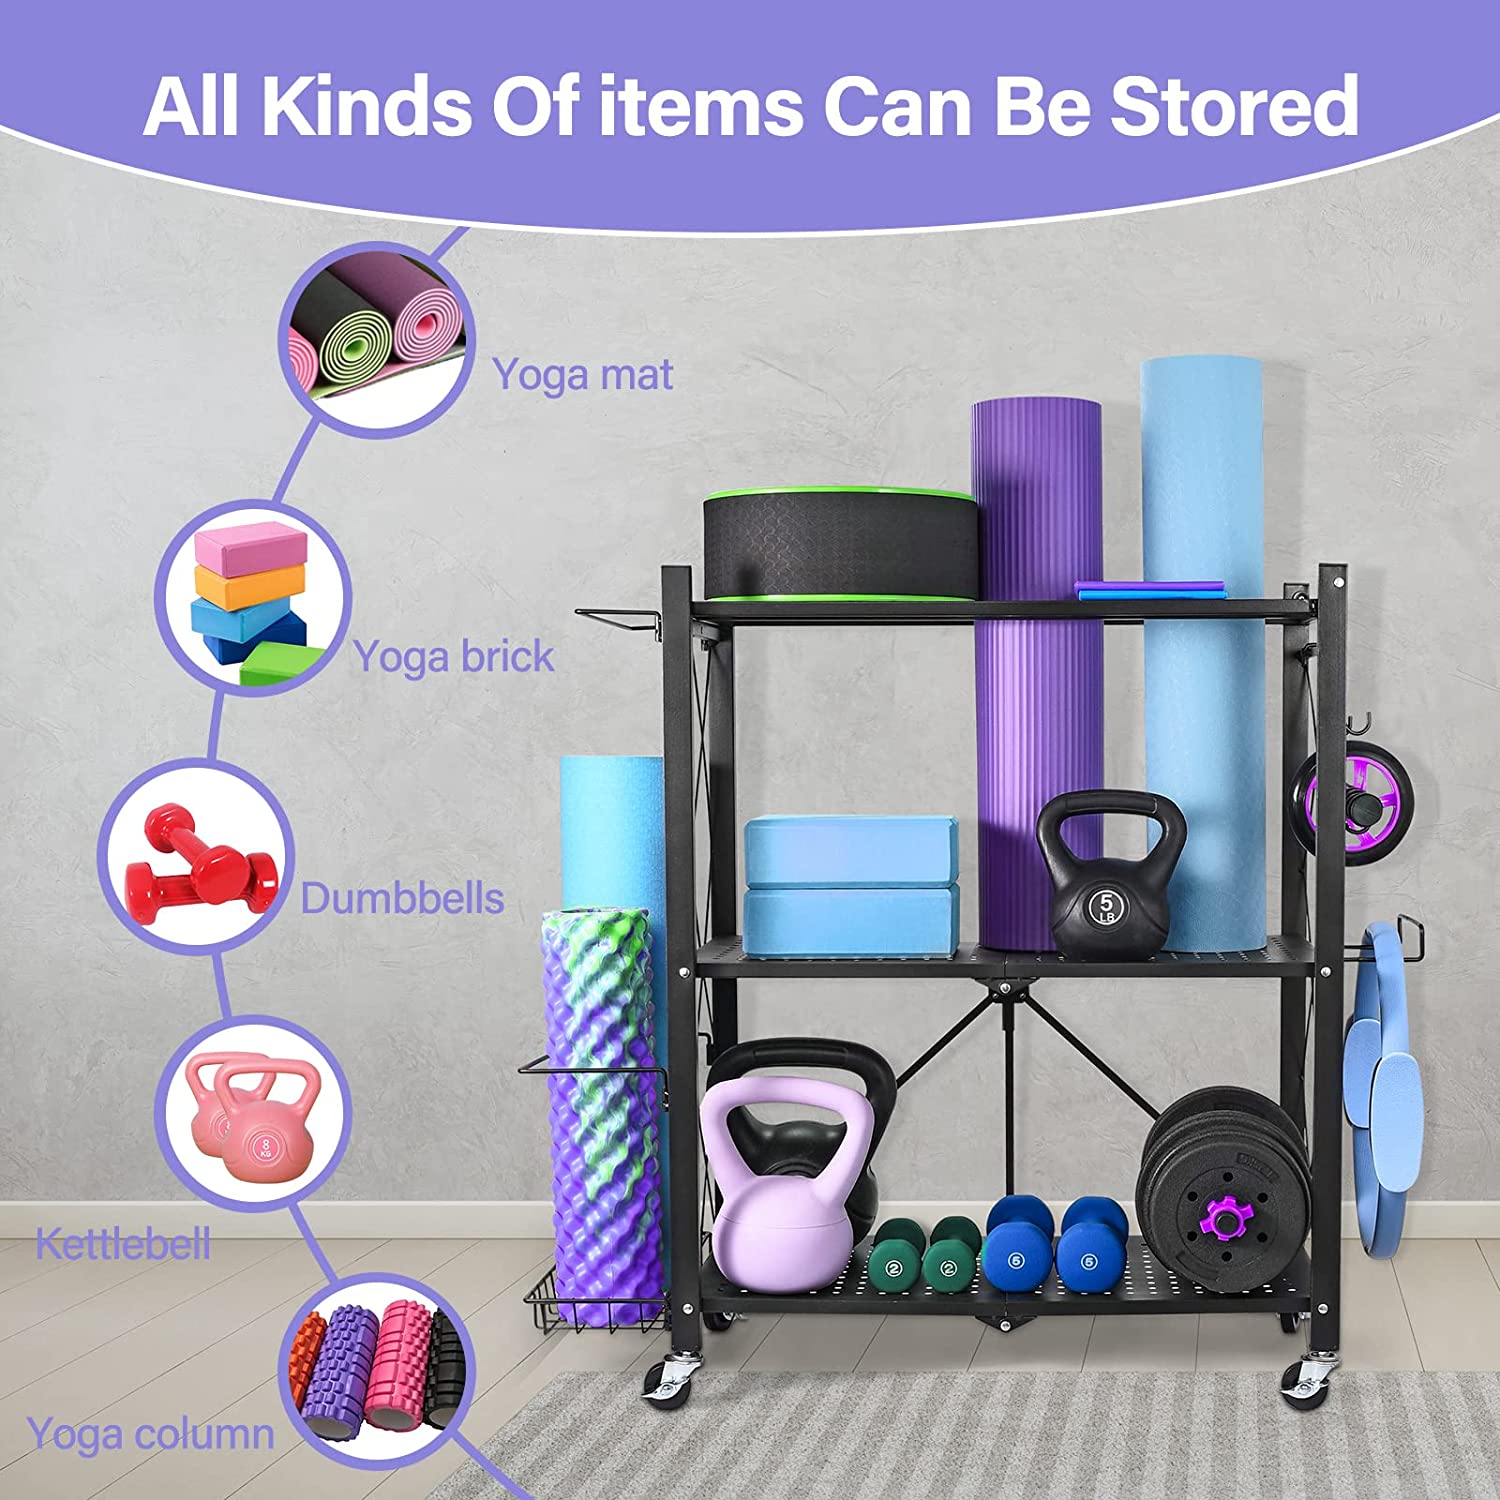 DACK Yoga Mat Storage Rack,Home Gym Storage Cart,Workout Equipment Storage Organizer for Workout Room Yoga Accessories Dumbbell Kettlebell Resistance Bands,with Wheels Side Basket and Hooks